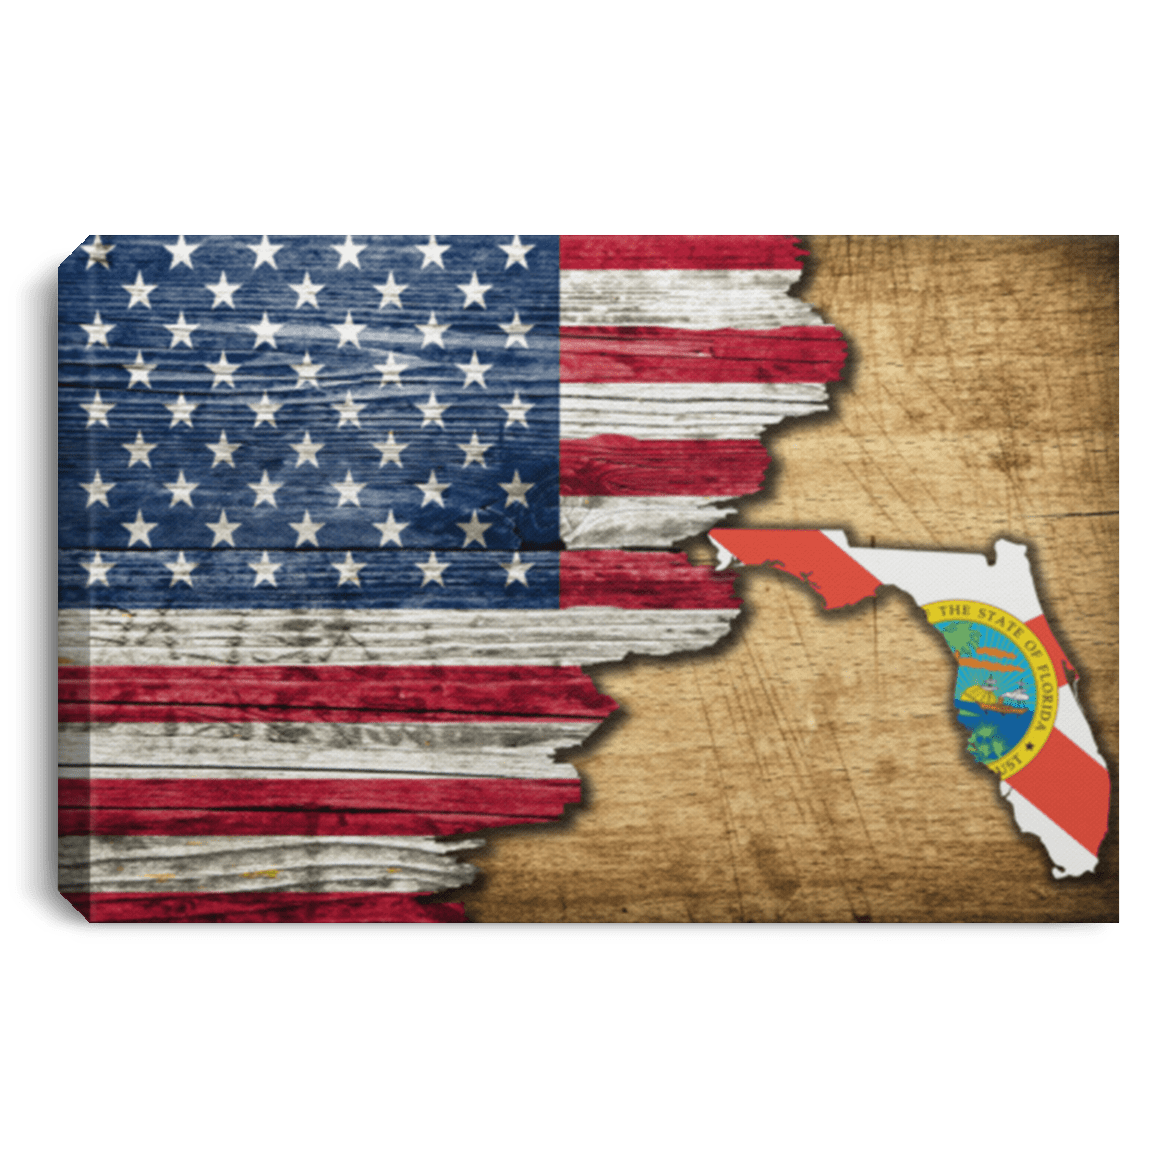 United States/Florida Flag Ripped Effect 18X12 Inches Landscape Canvas .75In Frame